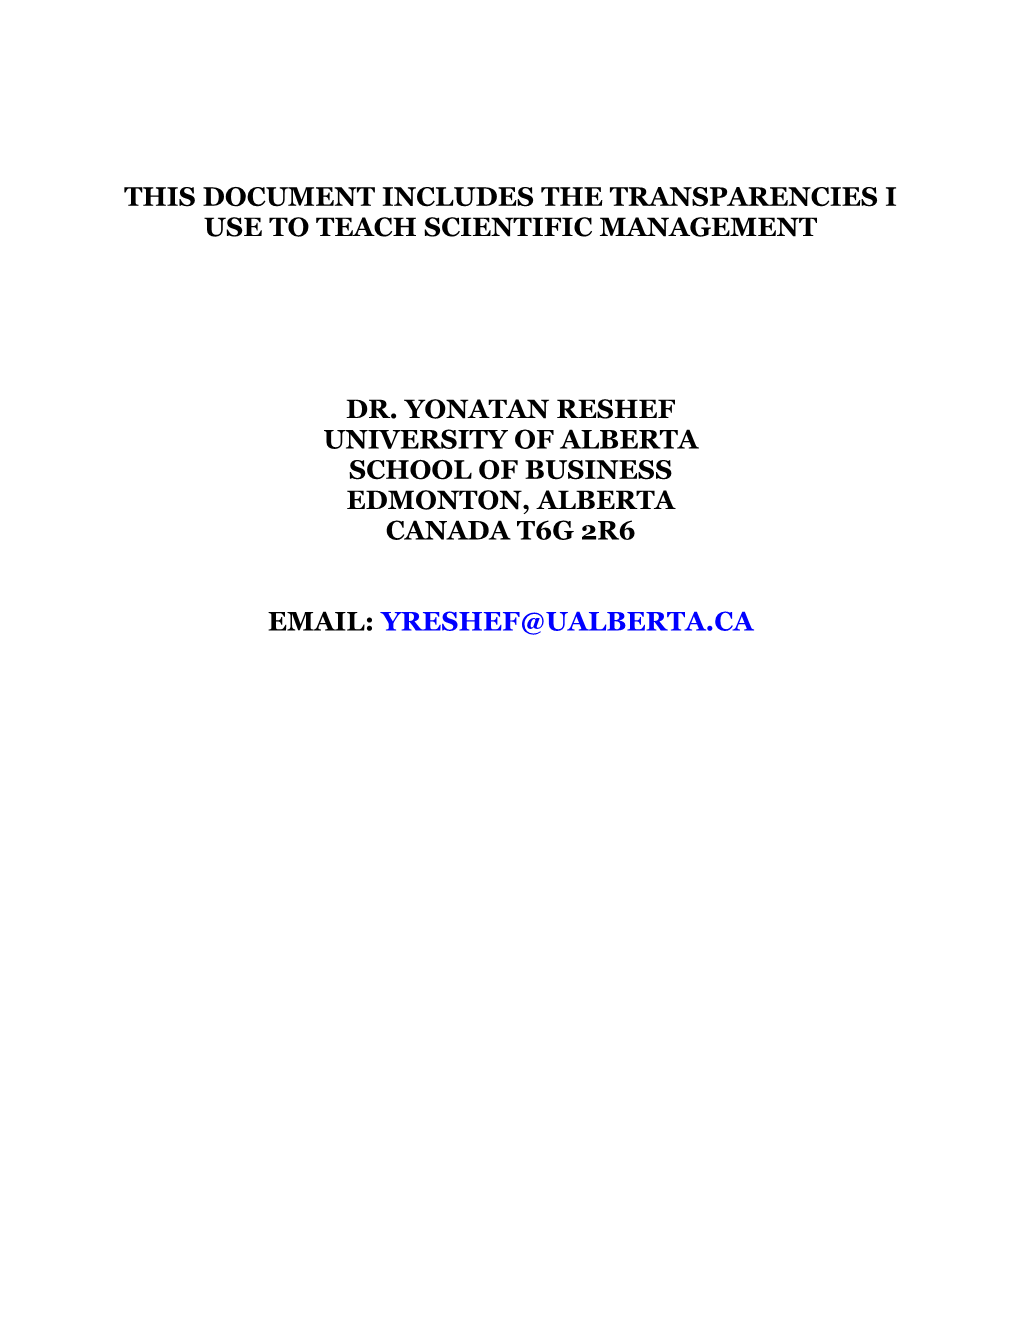 This Document Includes the Transparencies I Use to Teach Scientific Management